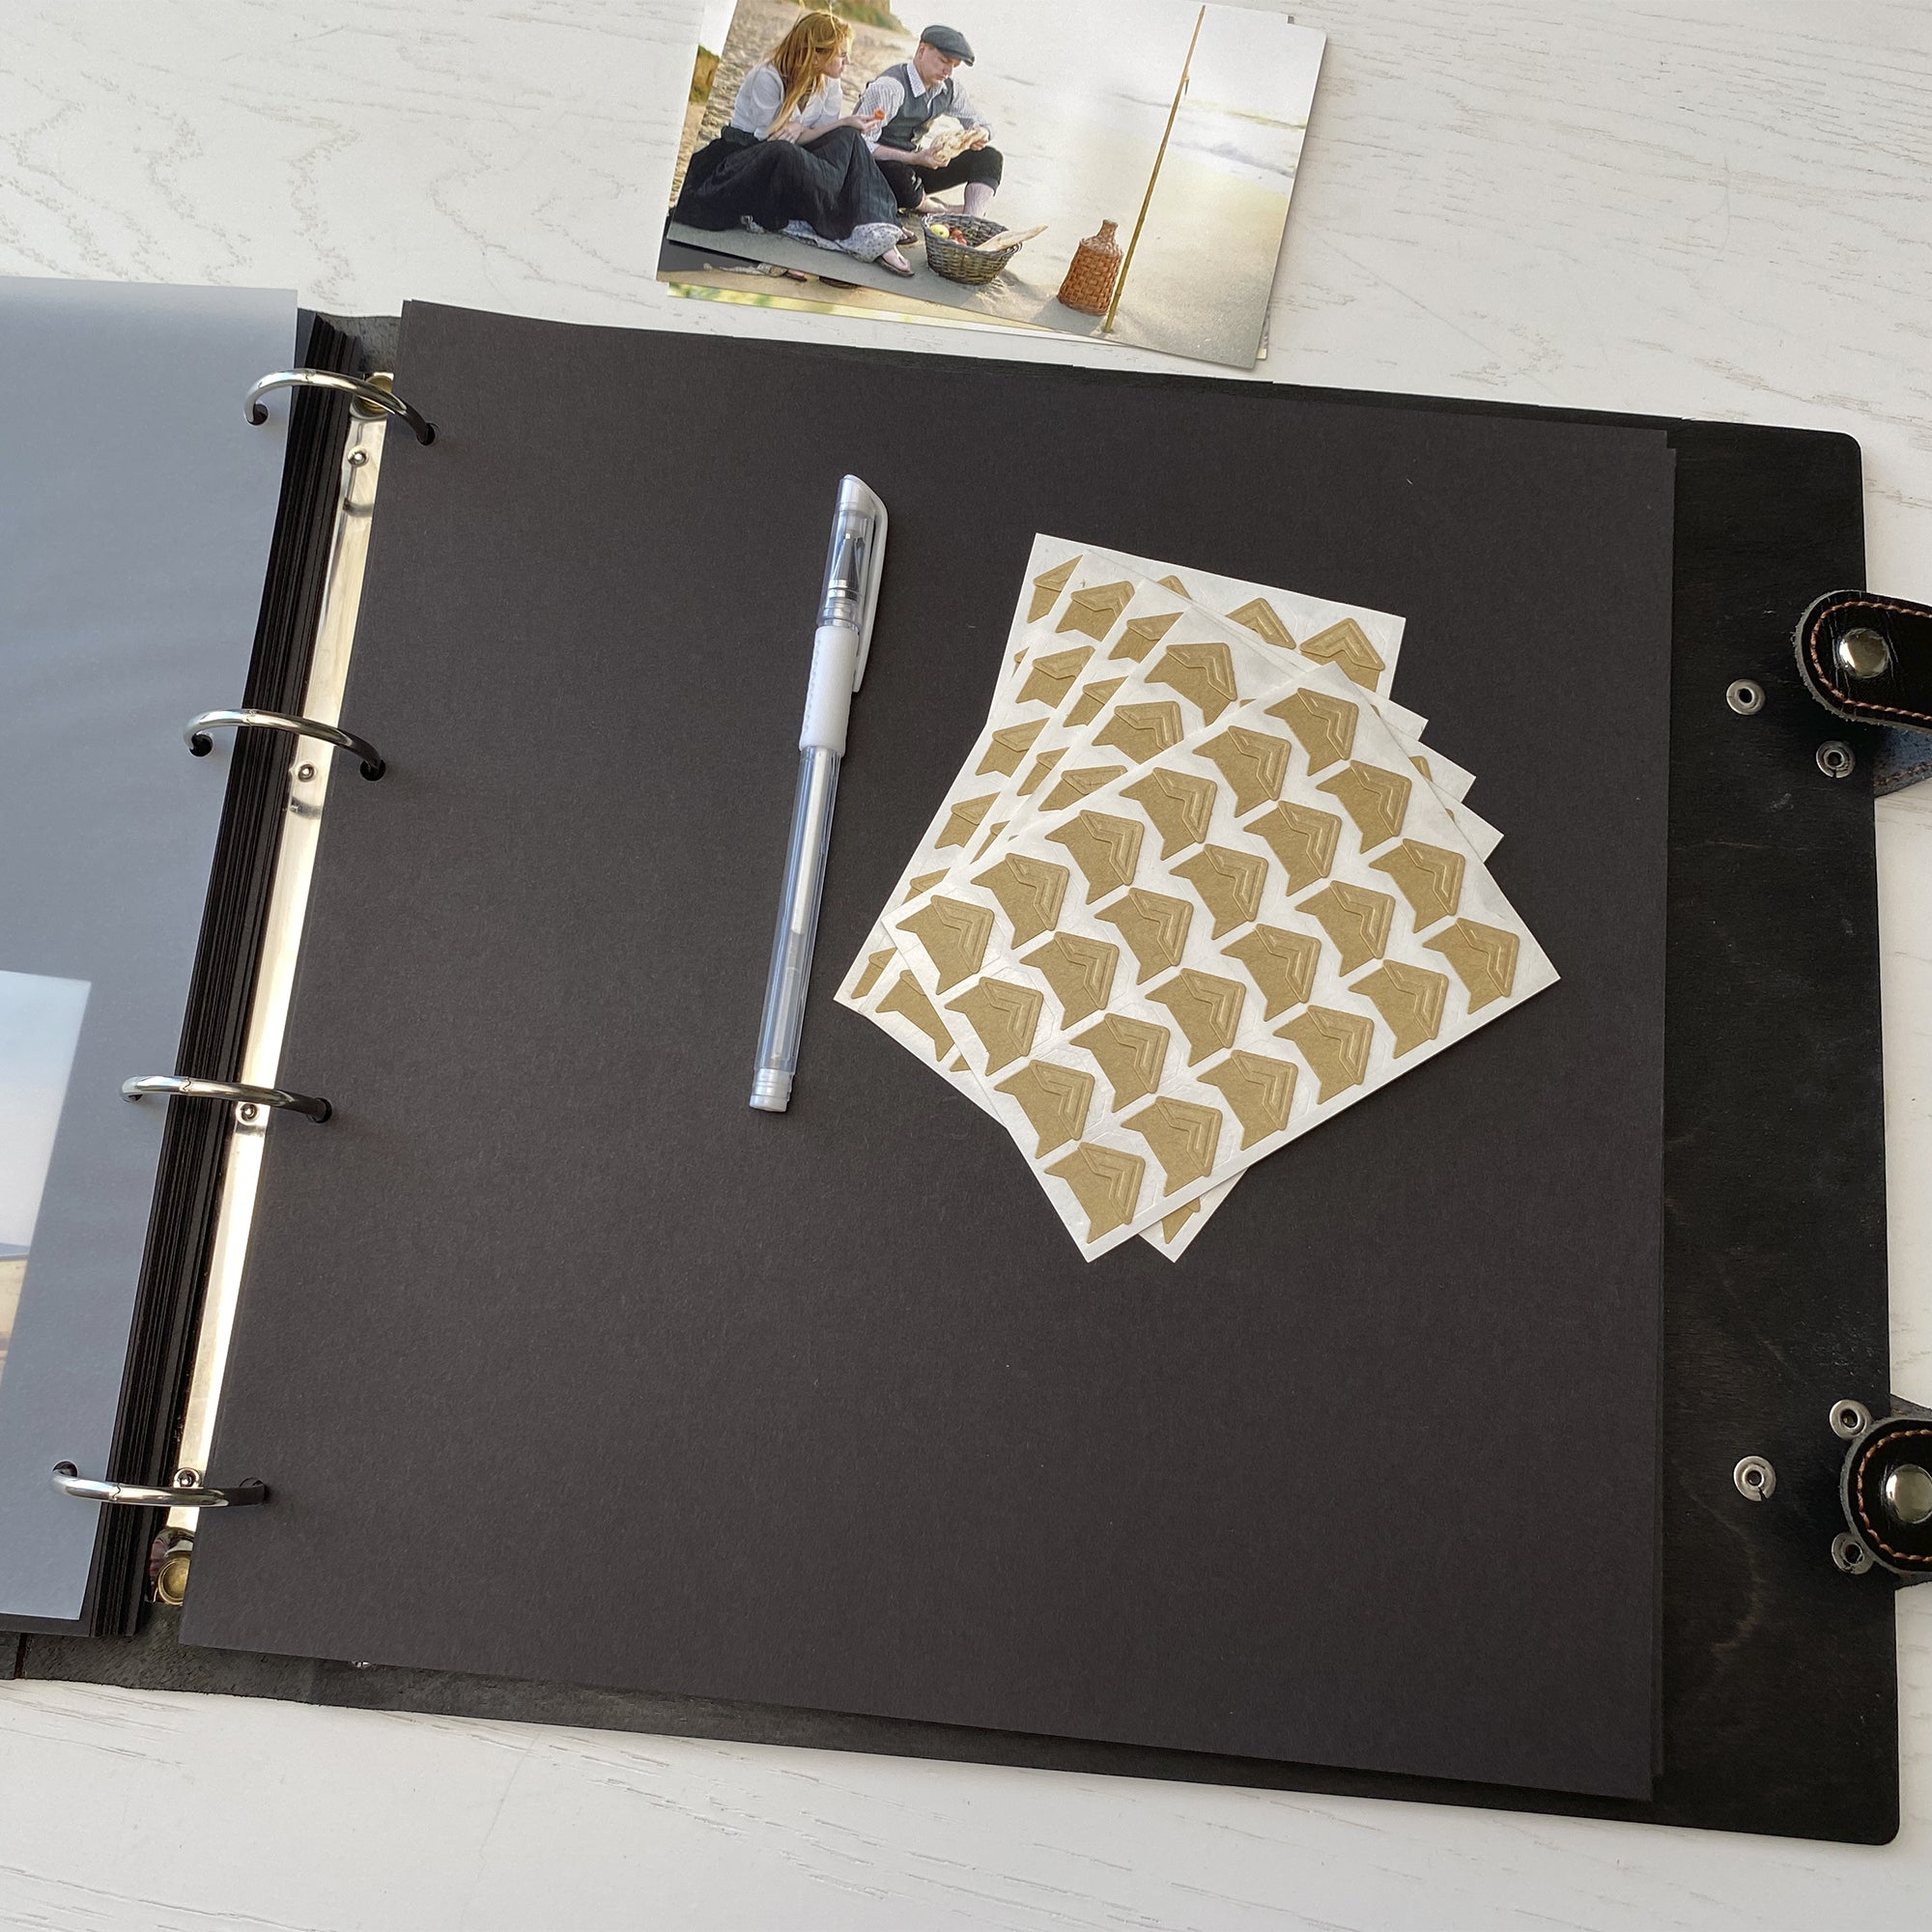 Personalized photo album with leather cover and Peonies Flowers engraving